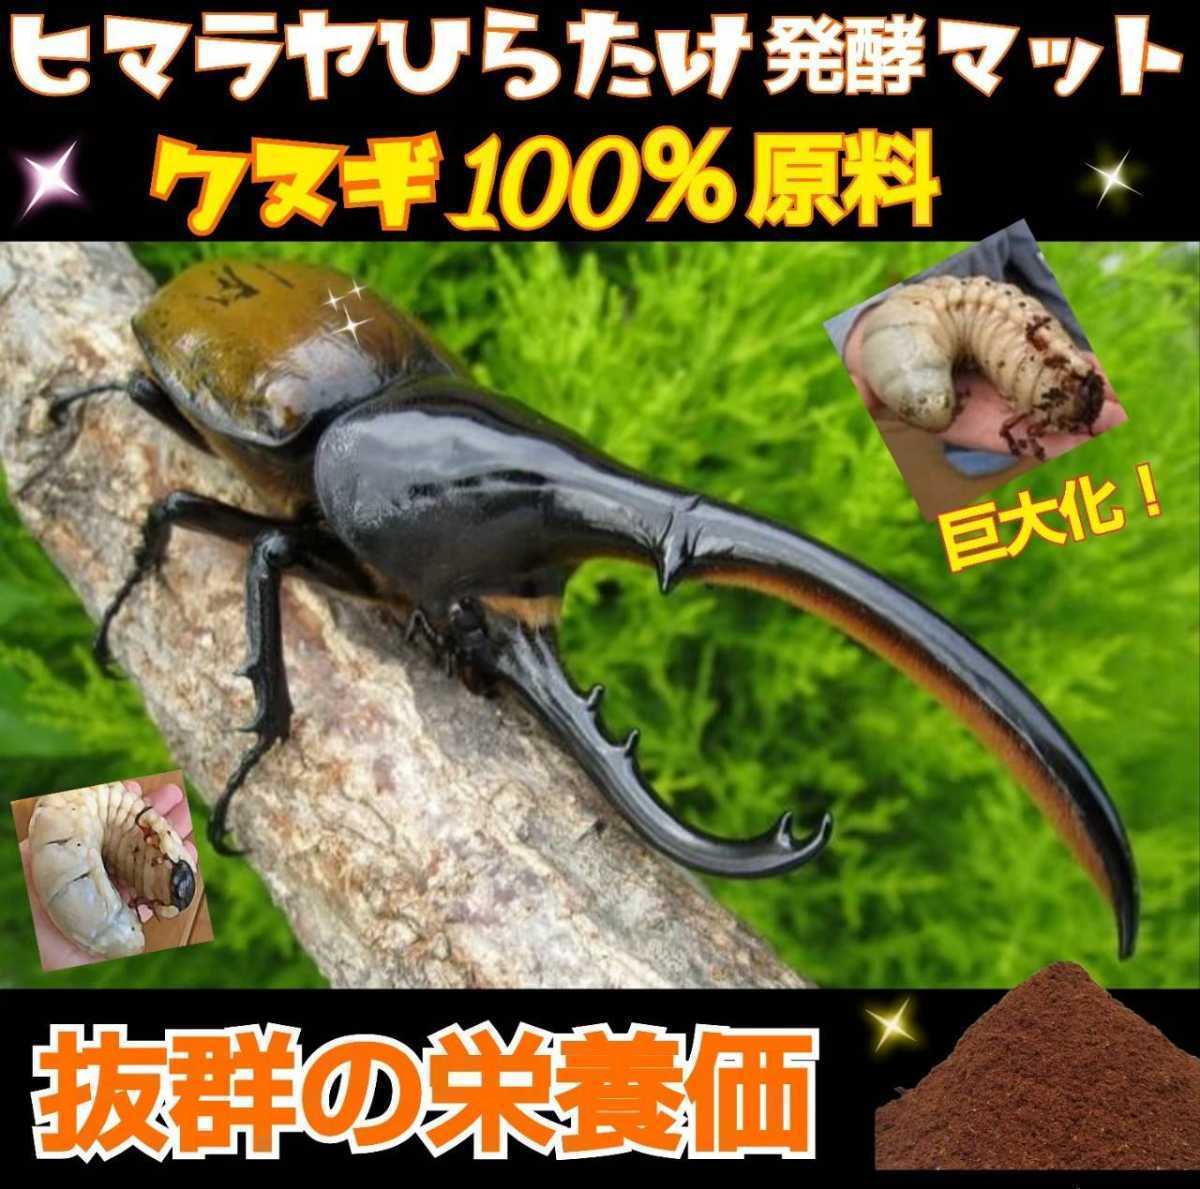  rhinoceros beetle larva . on a grand scale become [ improvement version ]himalaya common .. departure . mat [20L] larva. bait * production egg . eminent! nutrition addition agent go in *. insect *kobae... not!